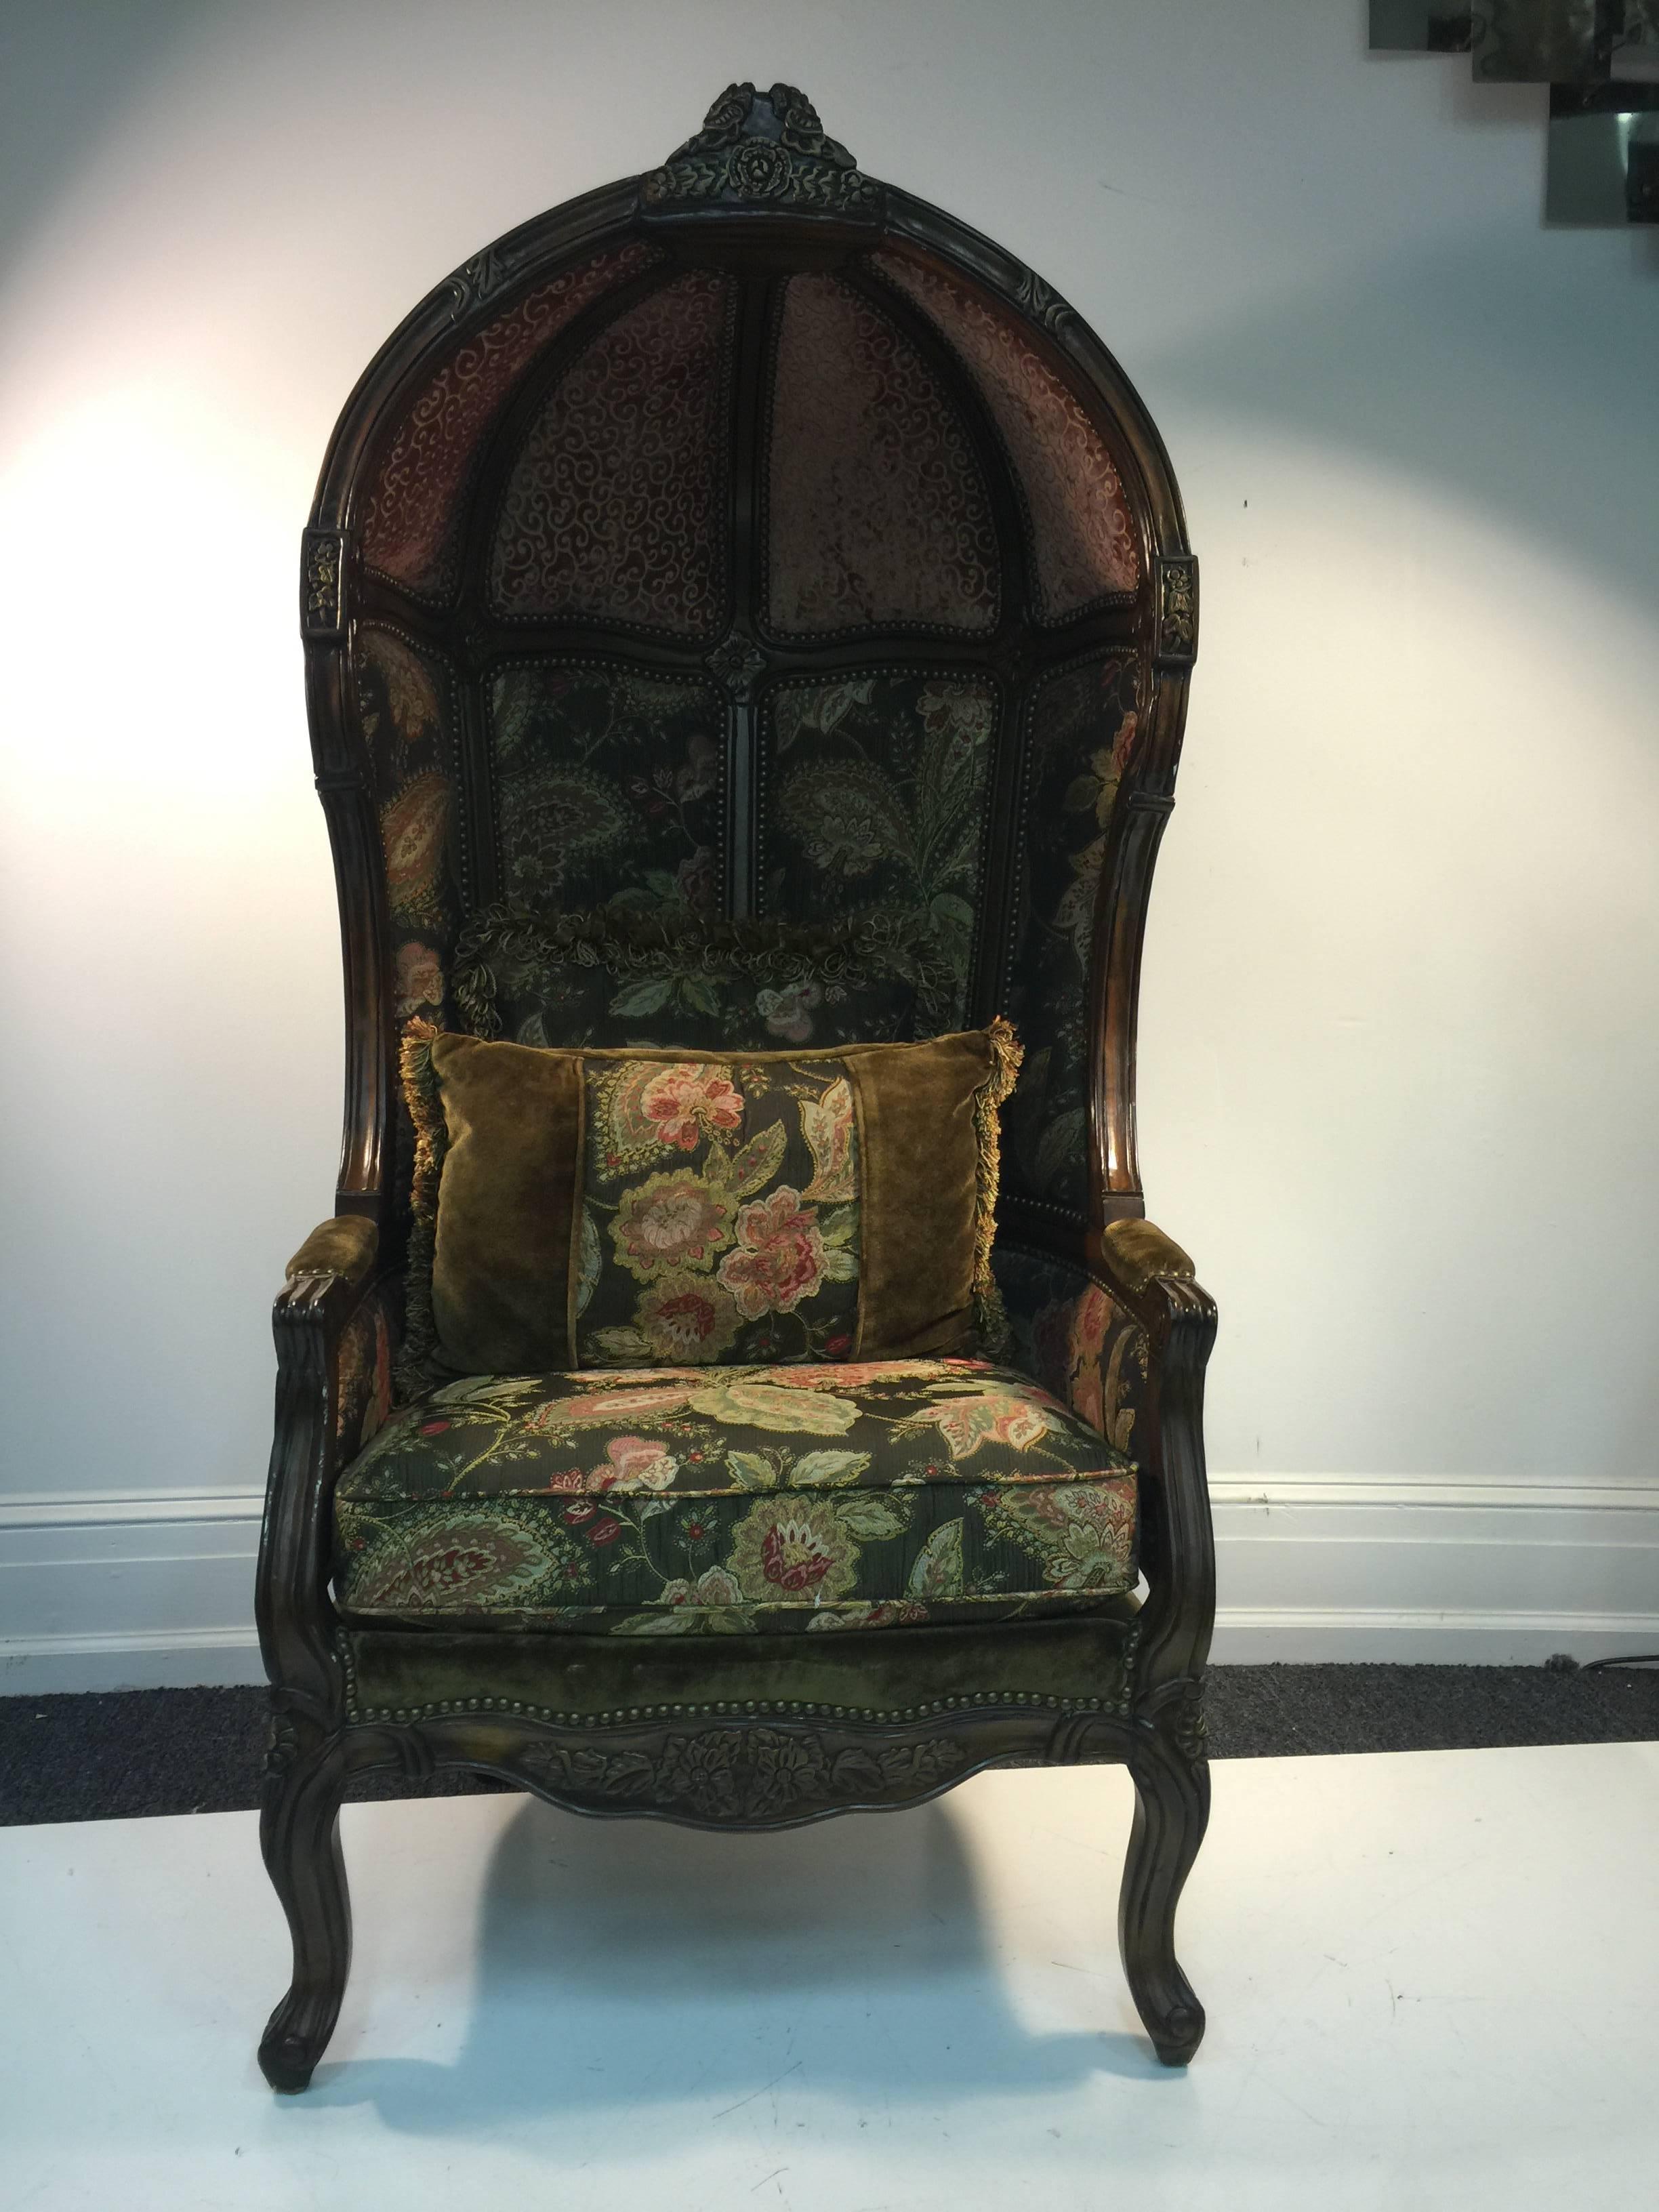 Exceptional Vintage Canopy Chair with Floral Accents, circa 1970 For Sale 2